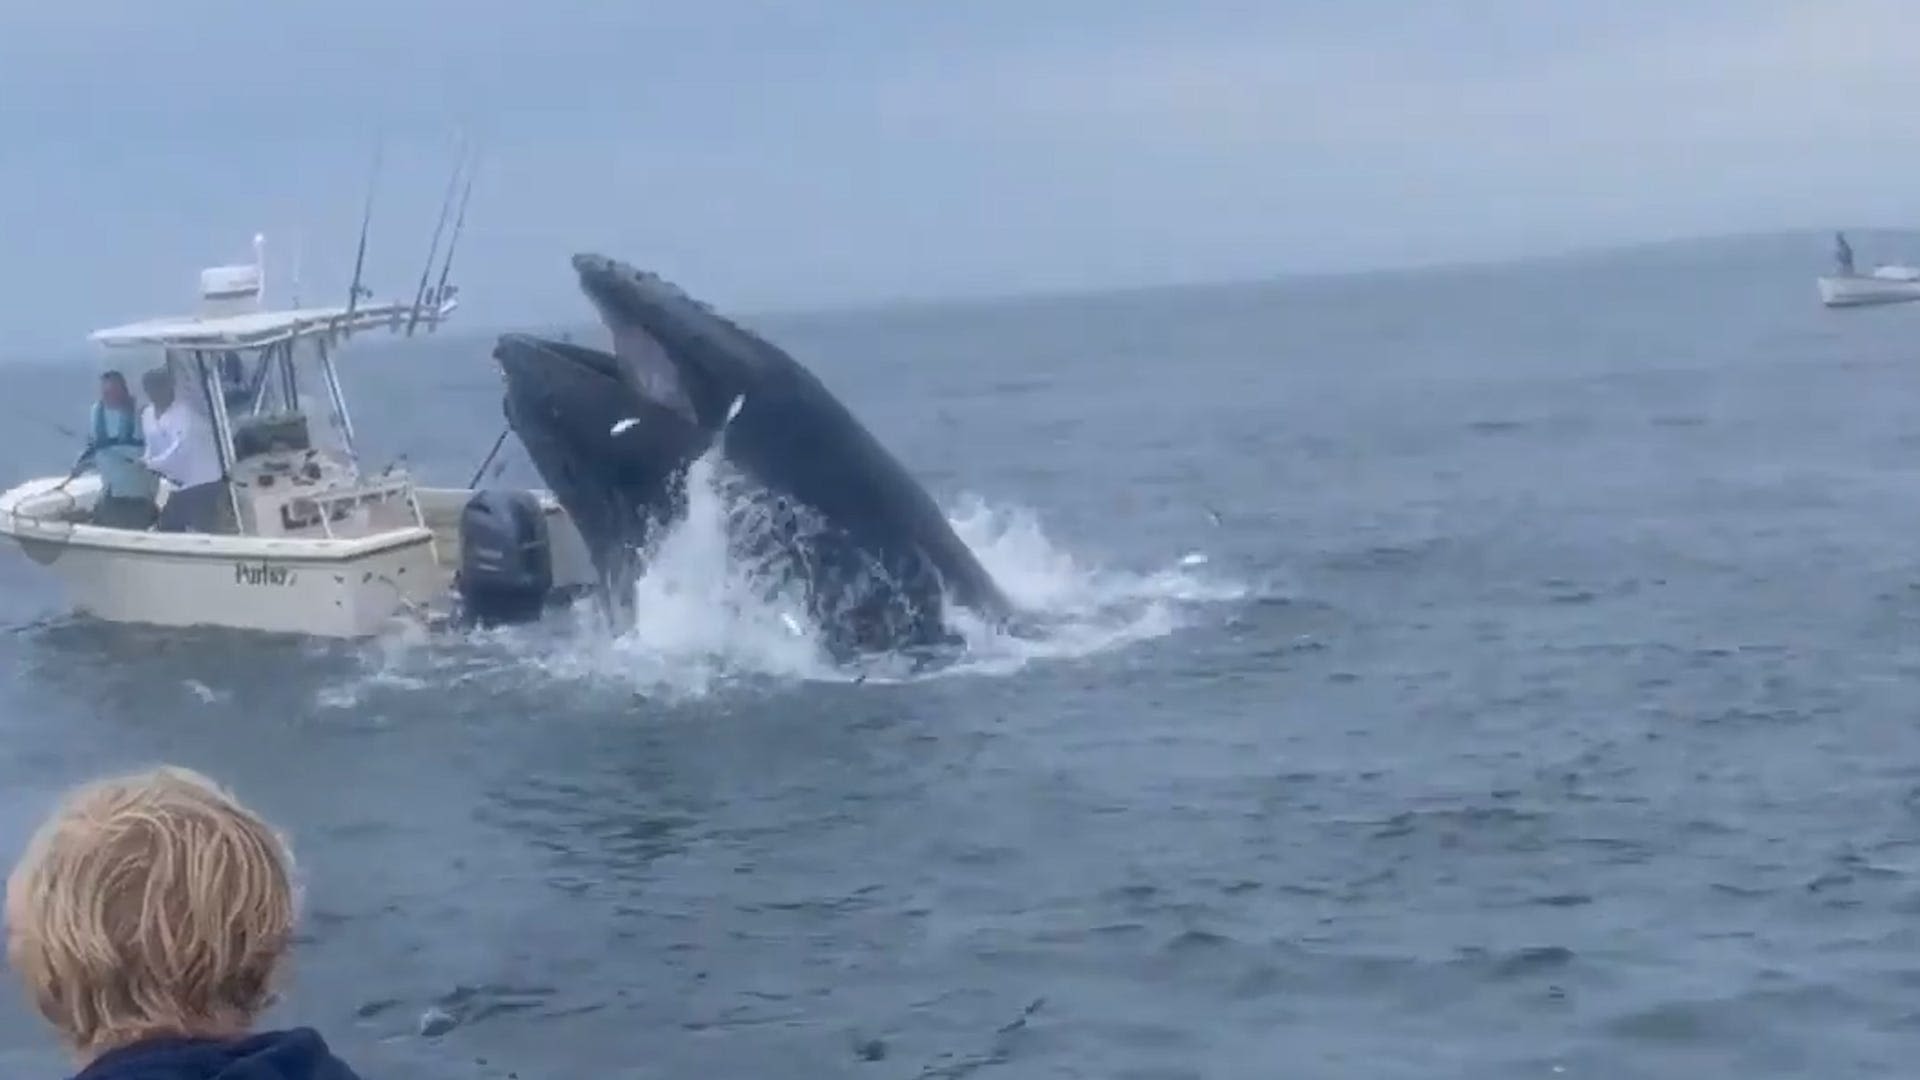 'This whale wasn’t angry, it was hungry': Experts weigh in after whale crashes into boat